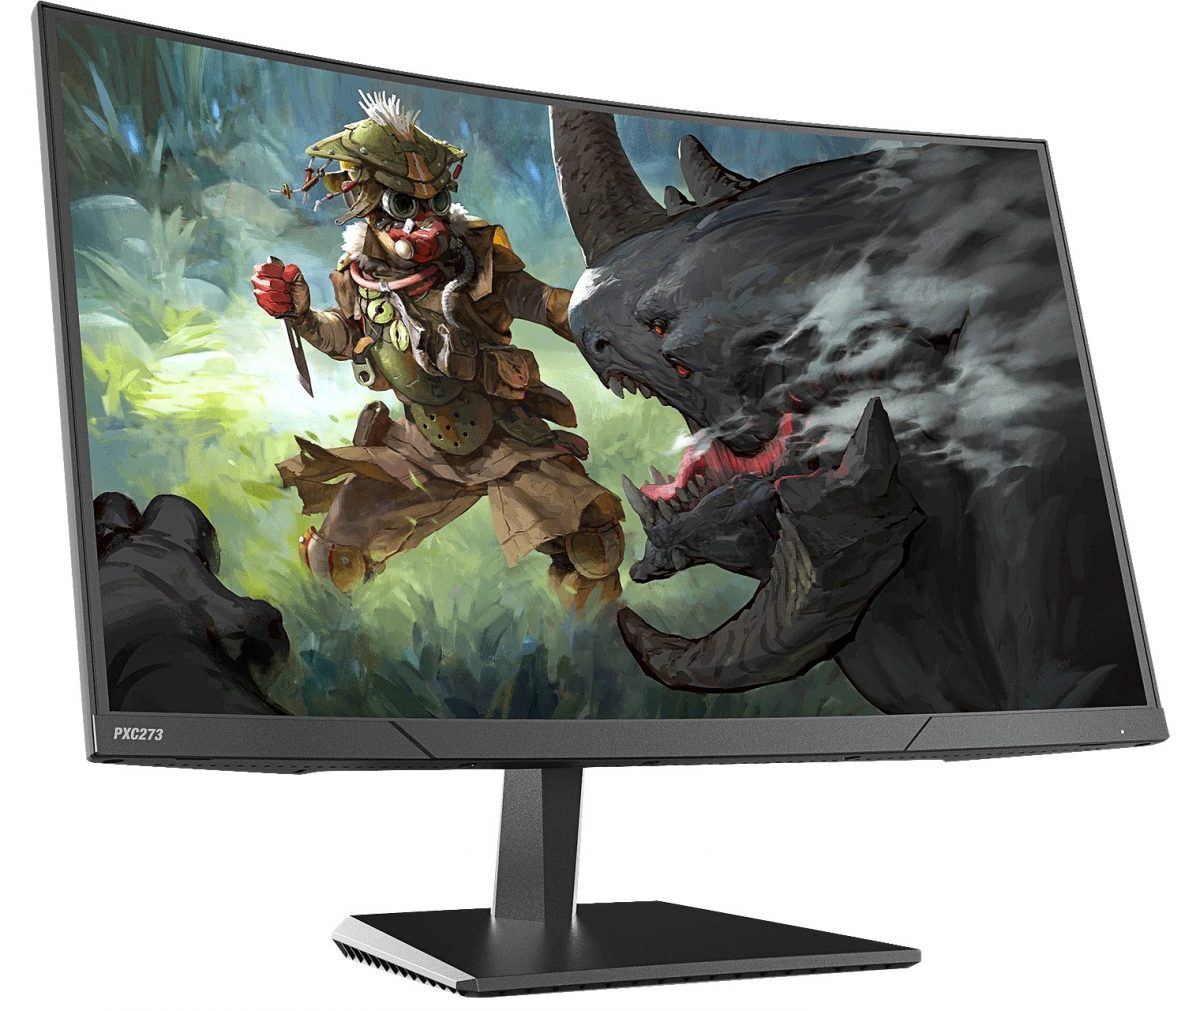 Pixio PXC273 curved gaming monitor.